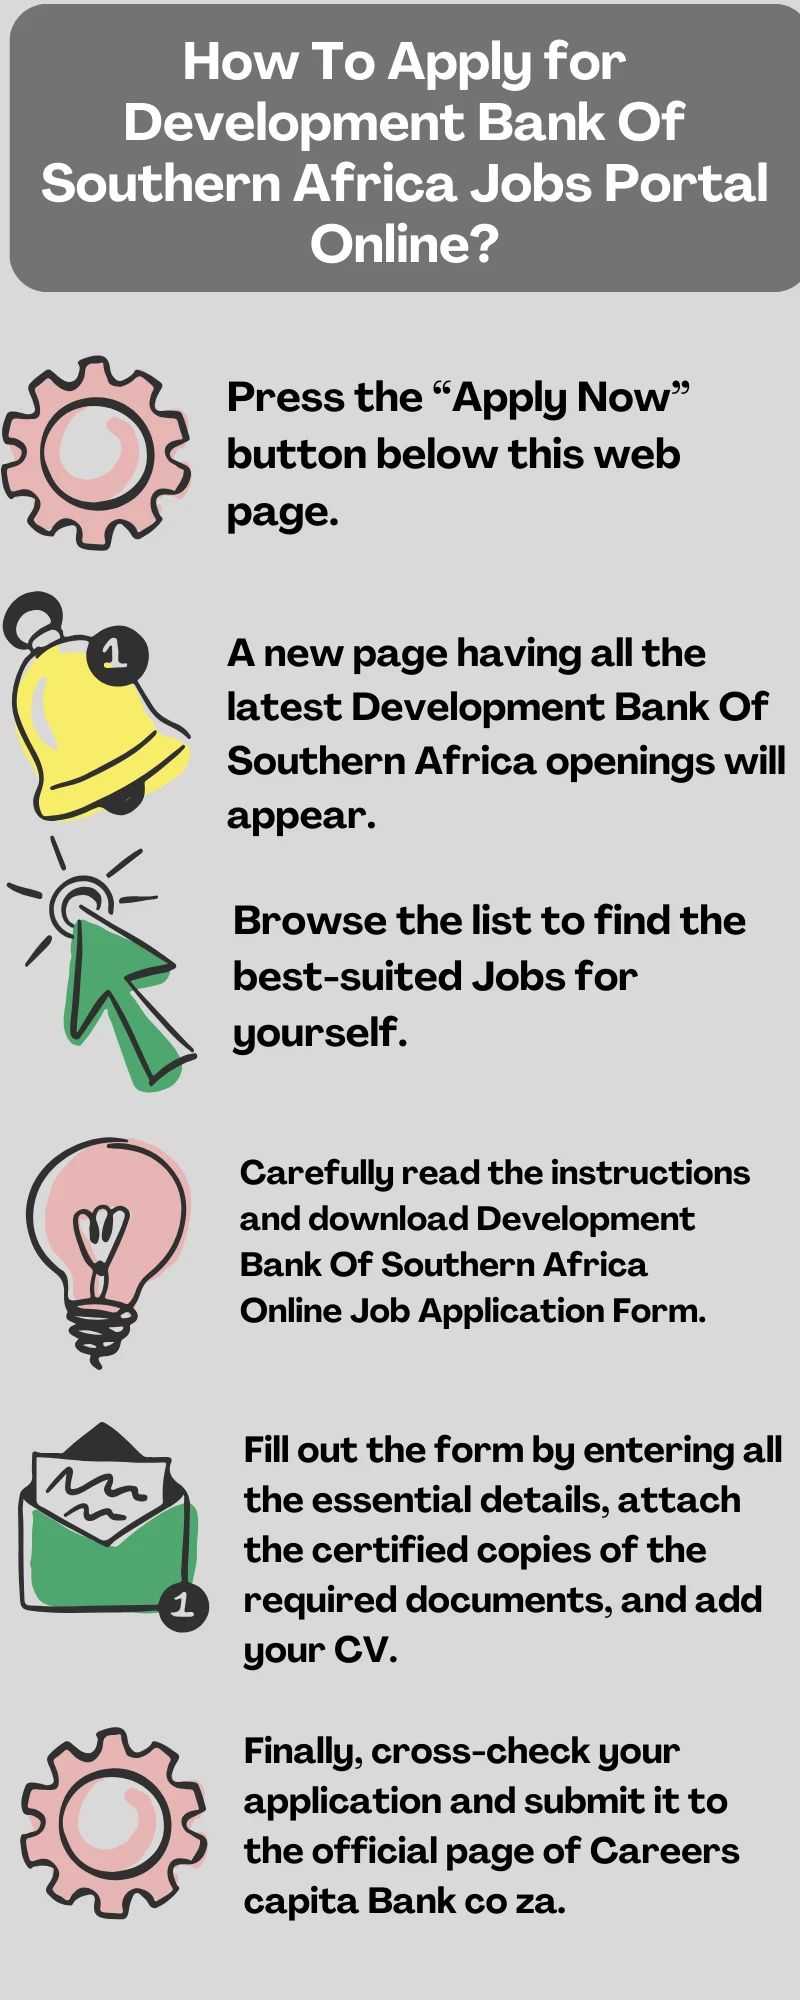 How To Apply for Development Bank Of Southern Africa Jobs Portal Online? 